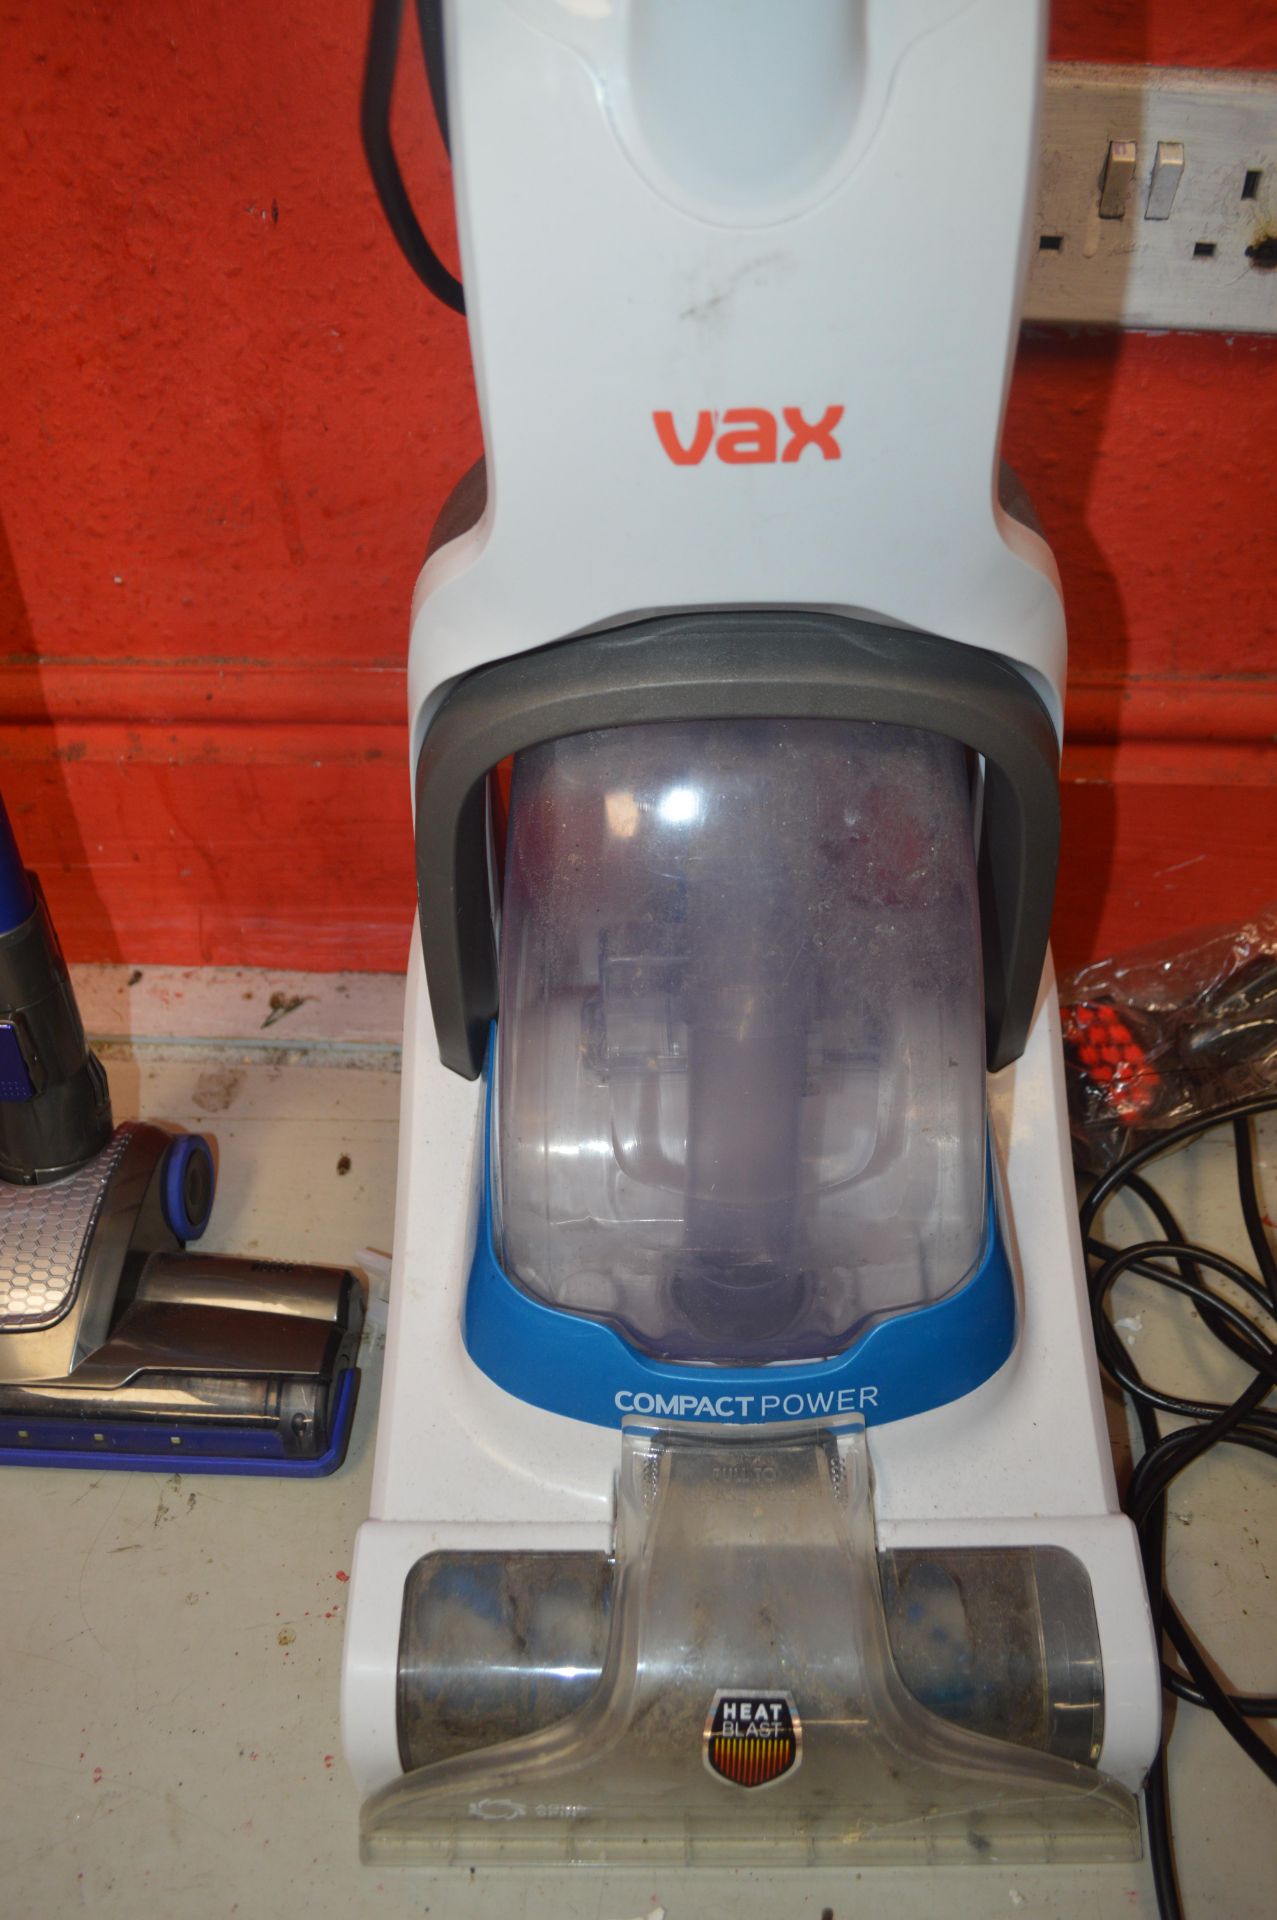 *Vax Compact Power Carpet Cleaner